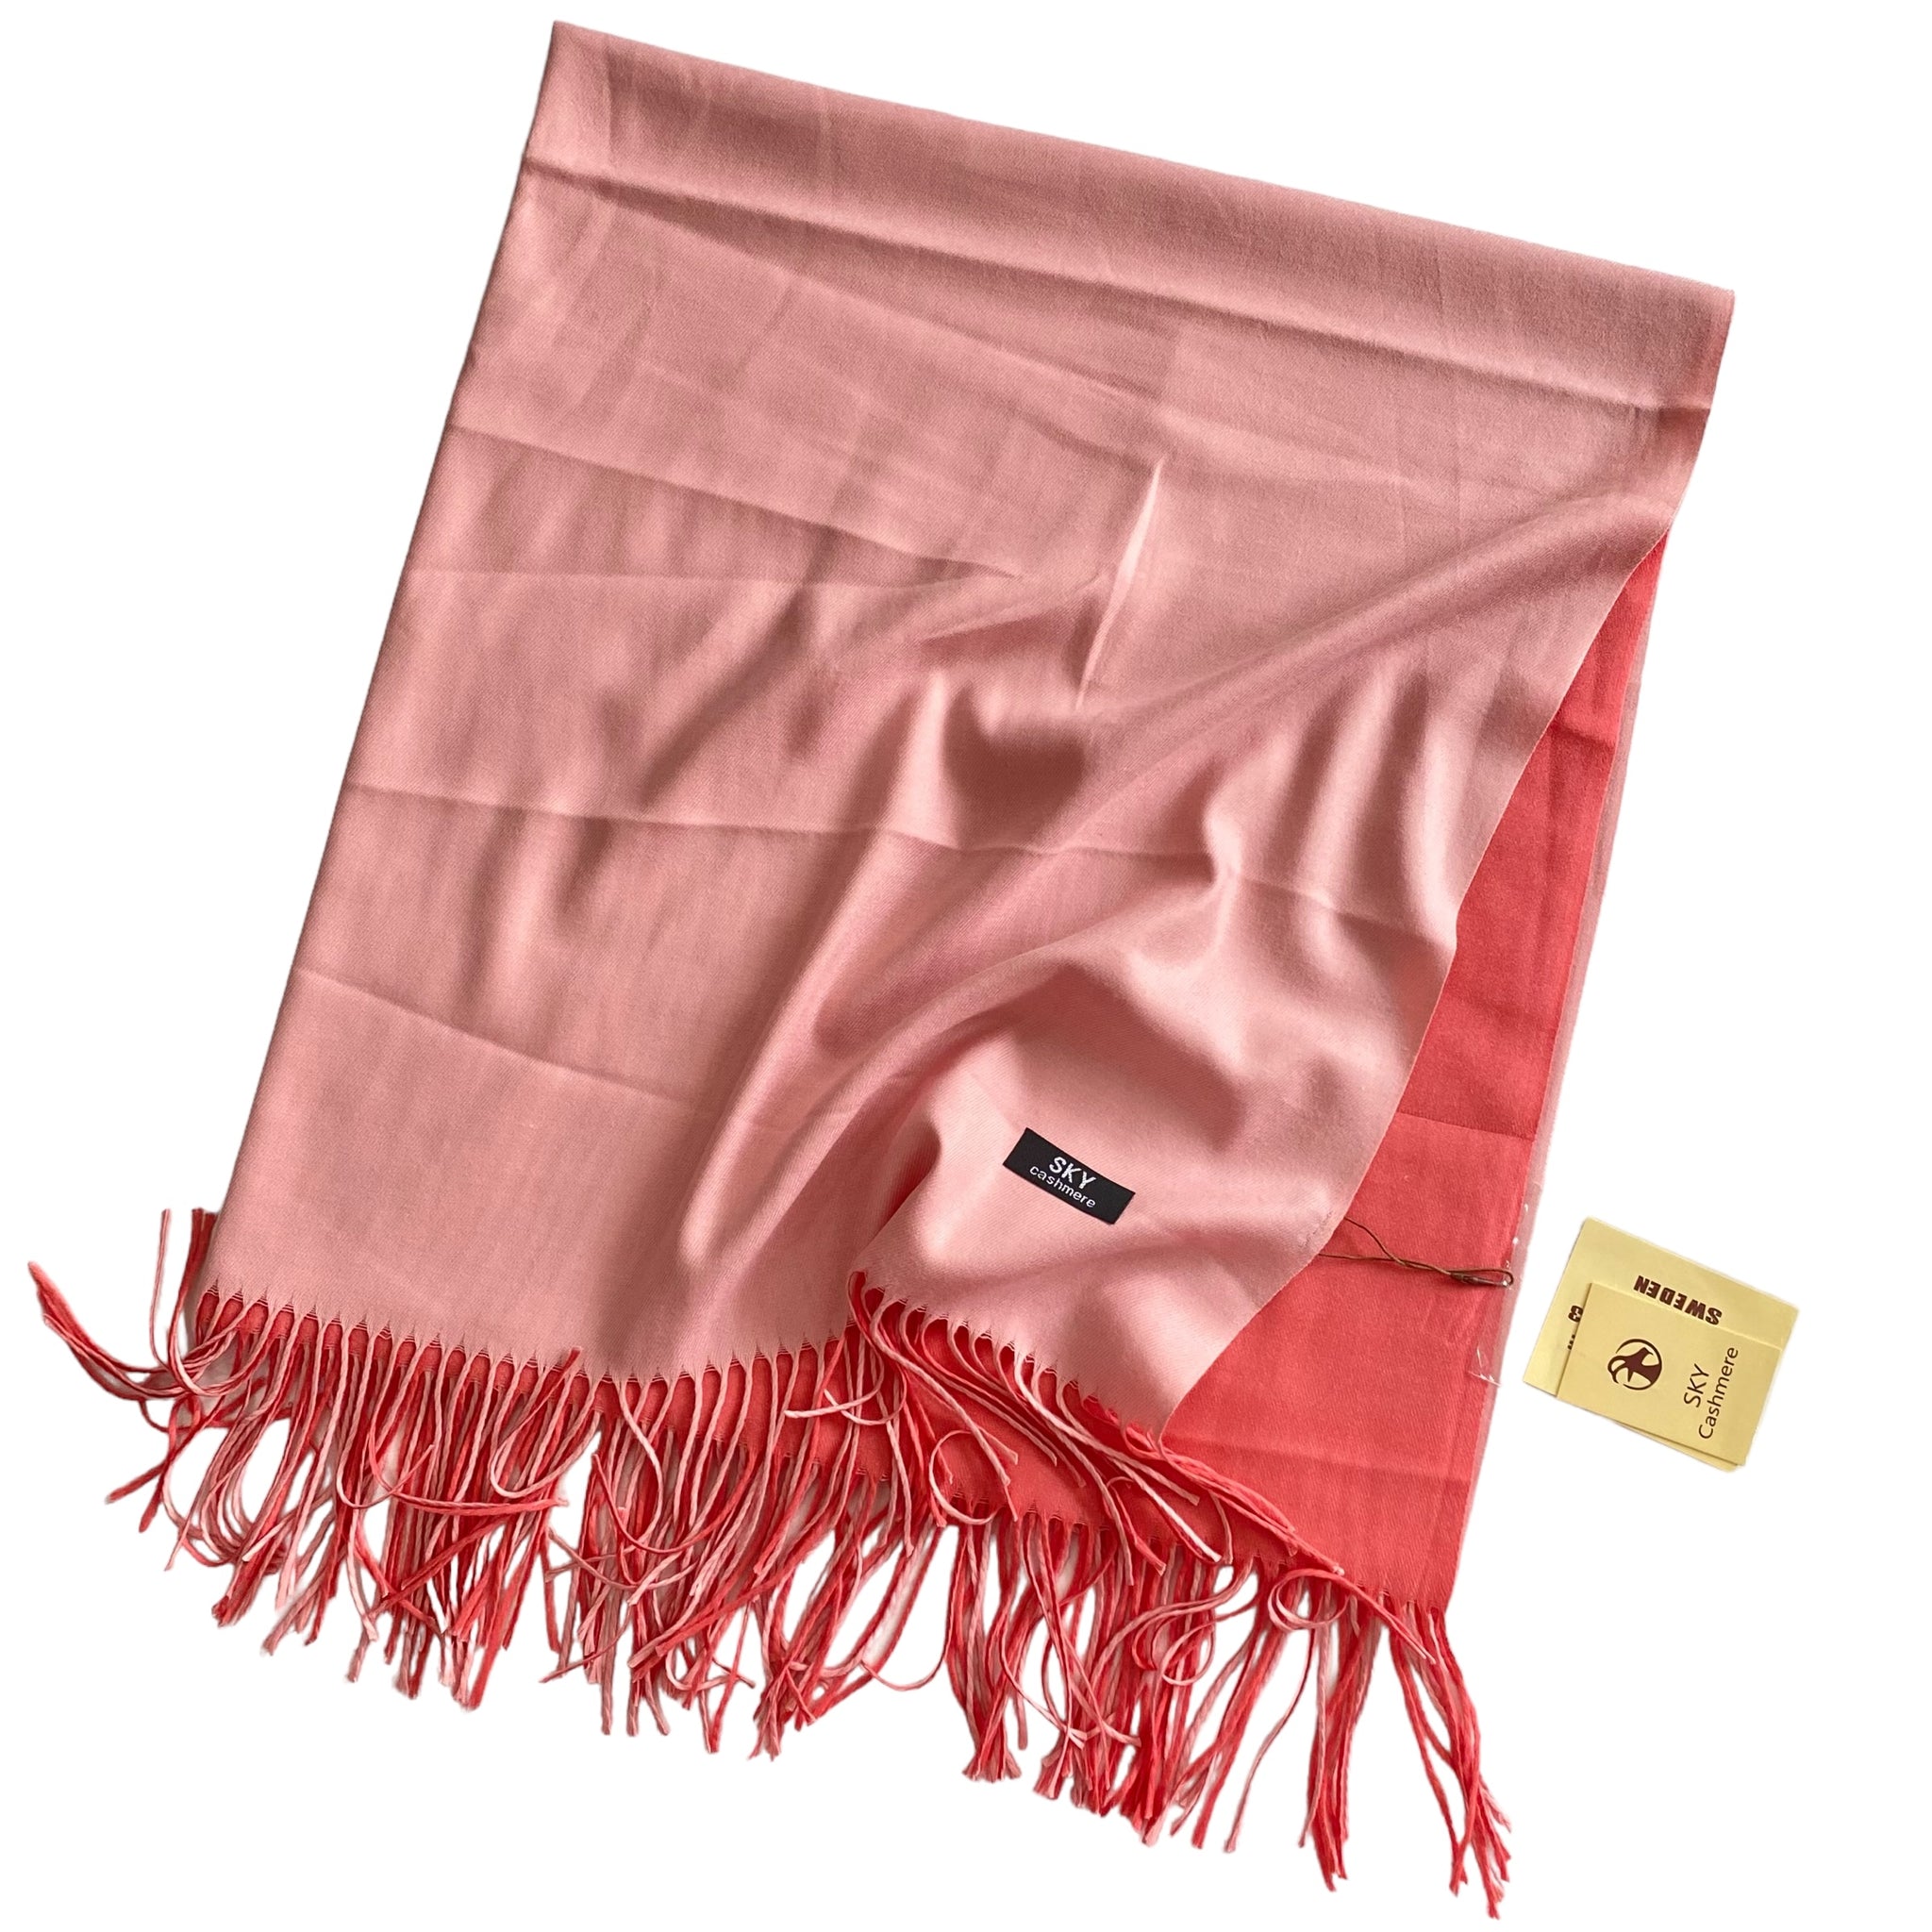 Reversible Winter Woollen Shawl (LARGE SIZE) - Candy Pink & Peachy Pink